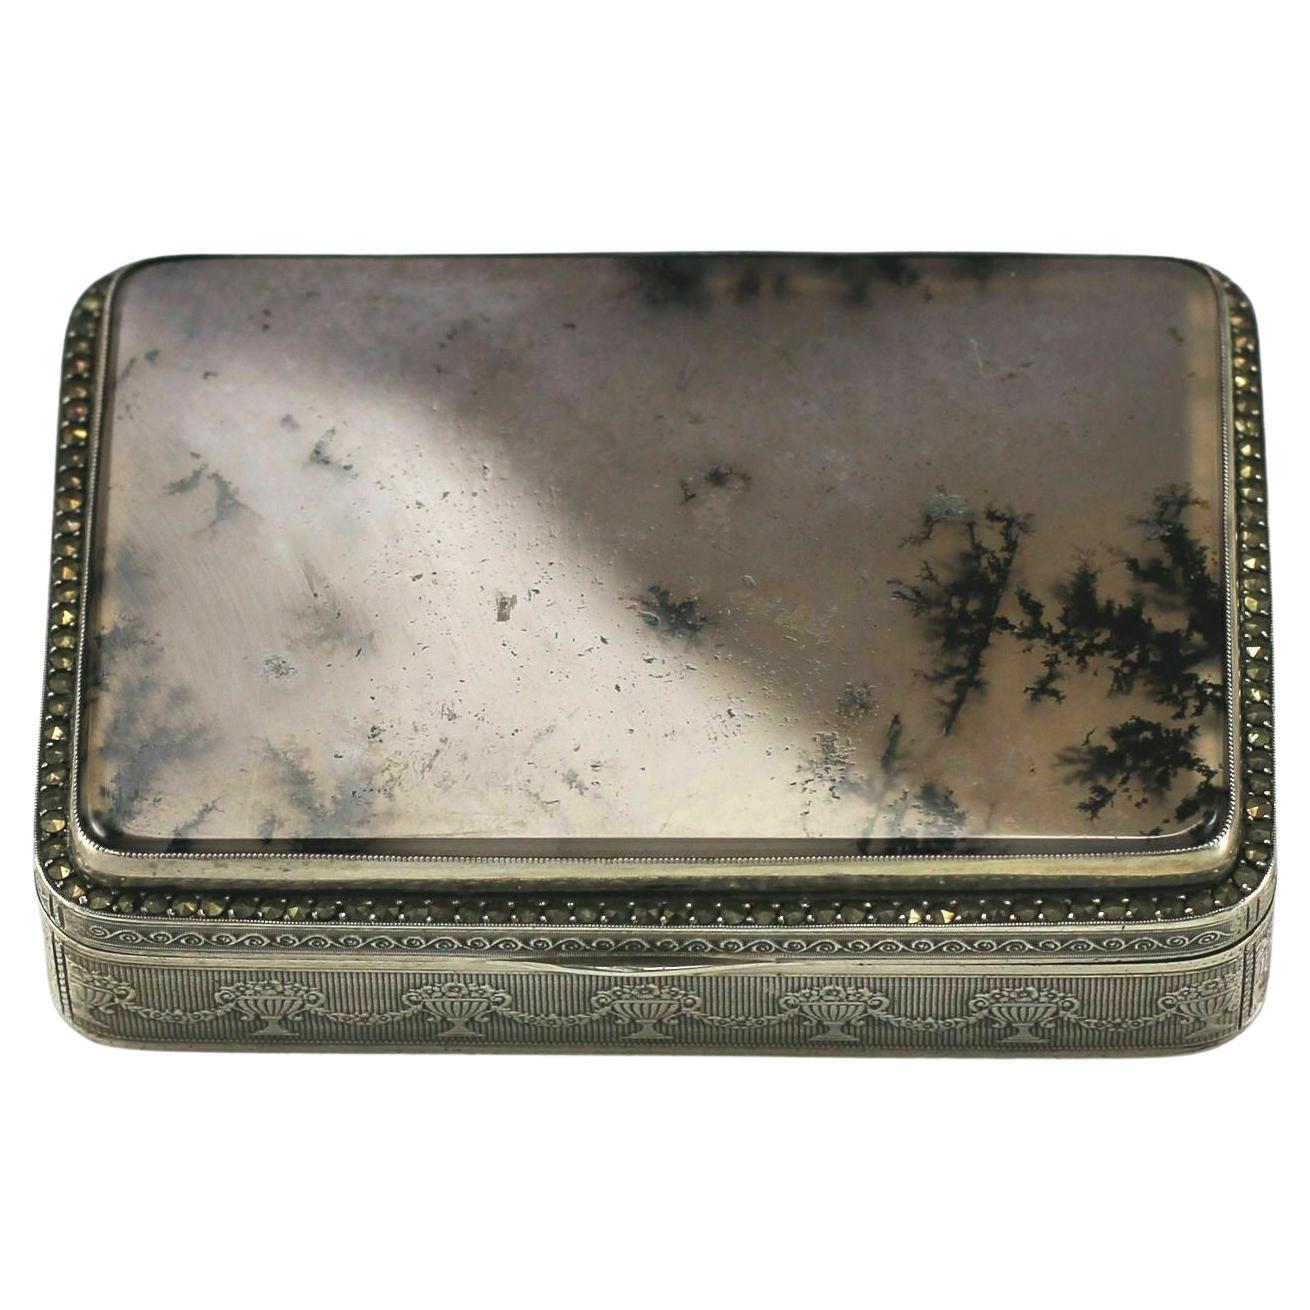 Meyle and Mayer German Sterling Silver Tobacco Box with Quartz / Stone, C1900 For Sale